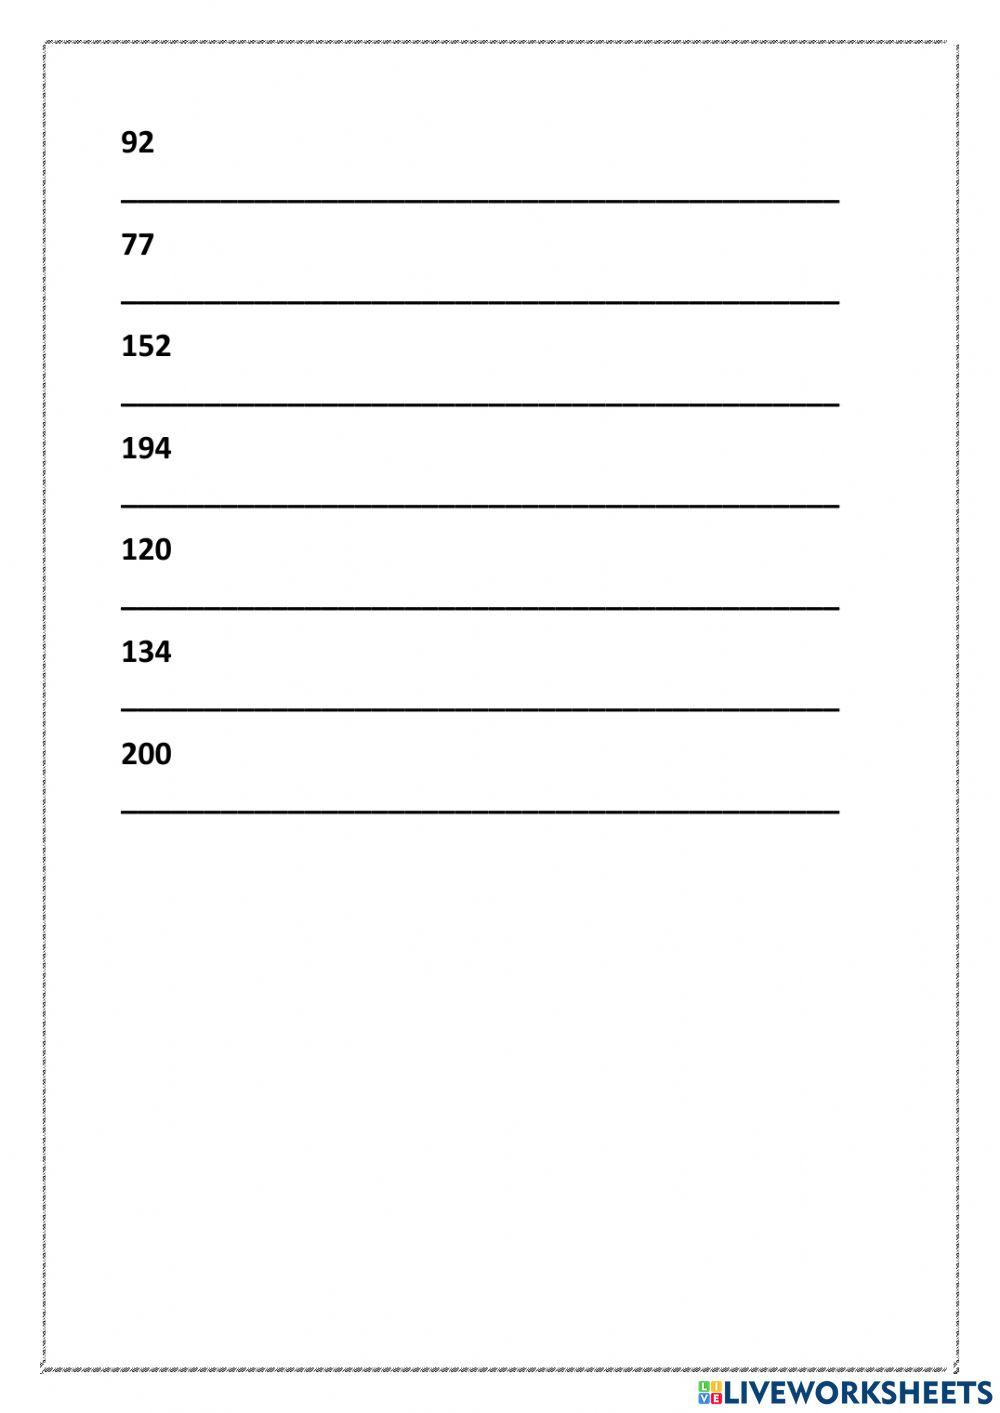 Read and write numbers 2